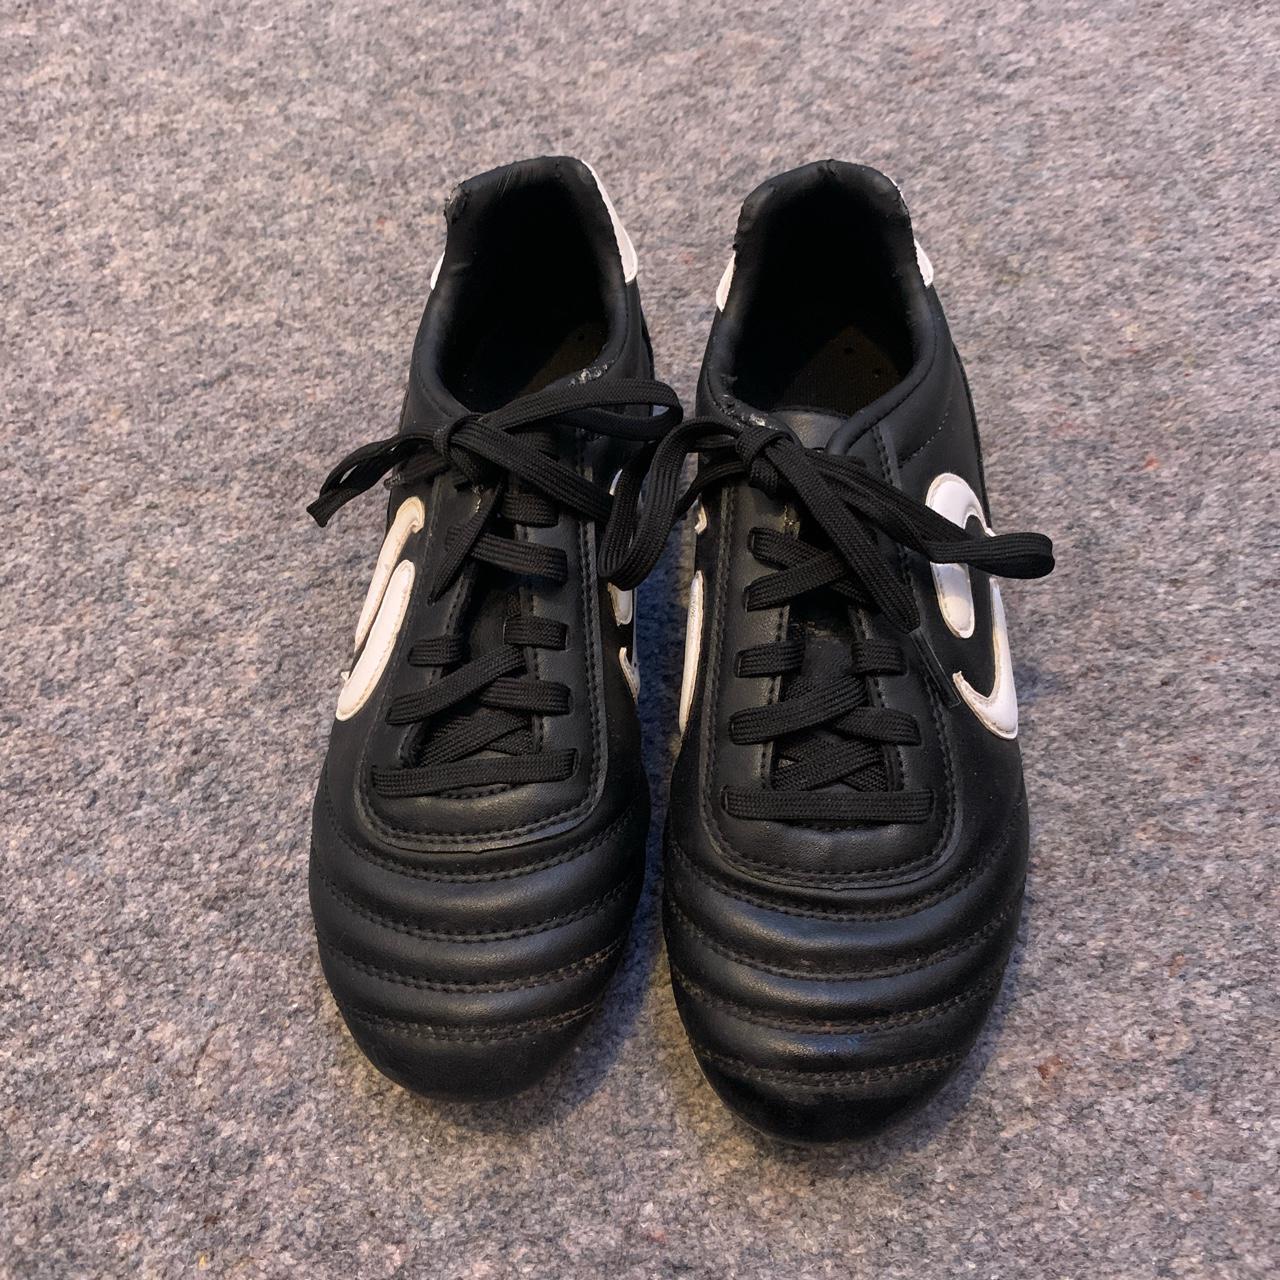 sondico football boots plastic studs used but in... - Depop